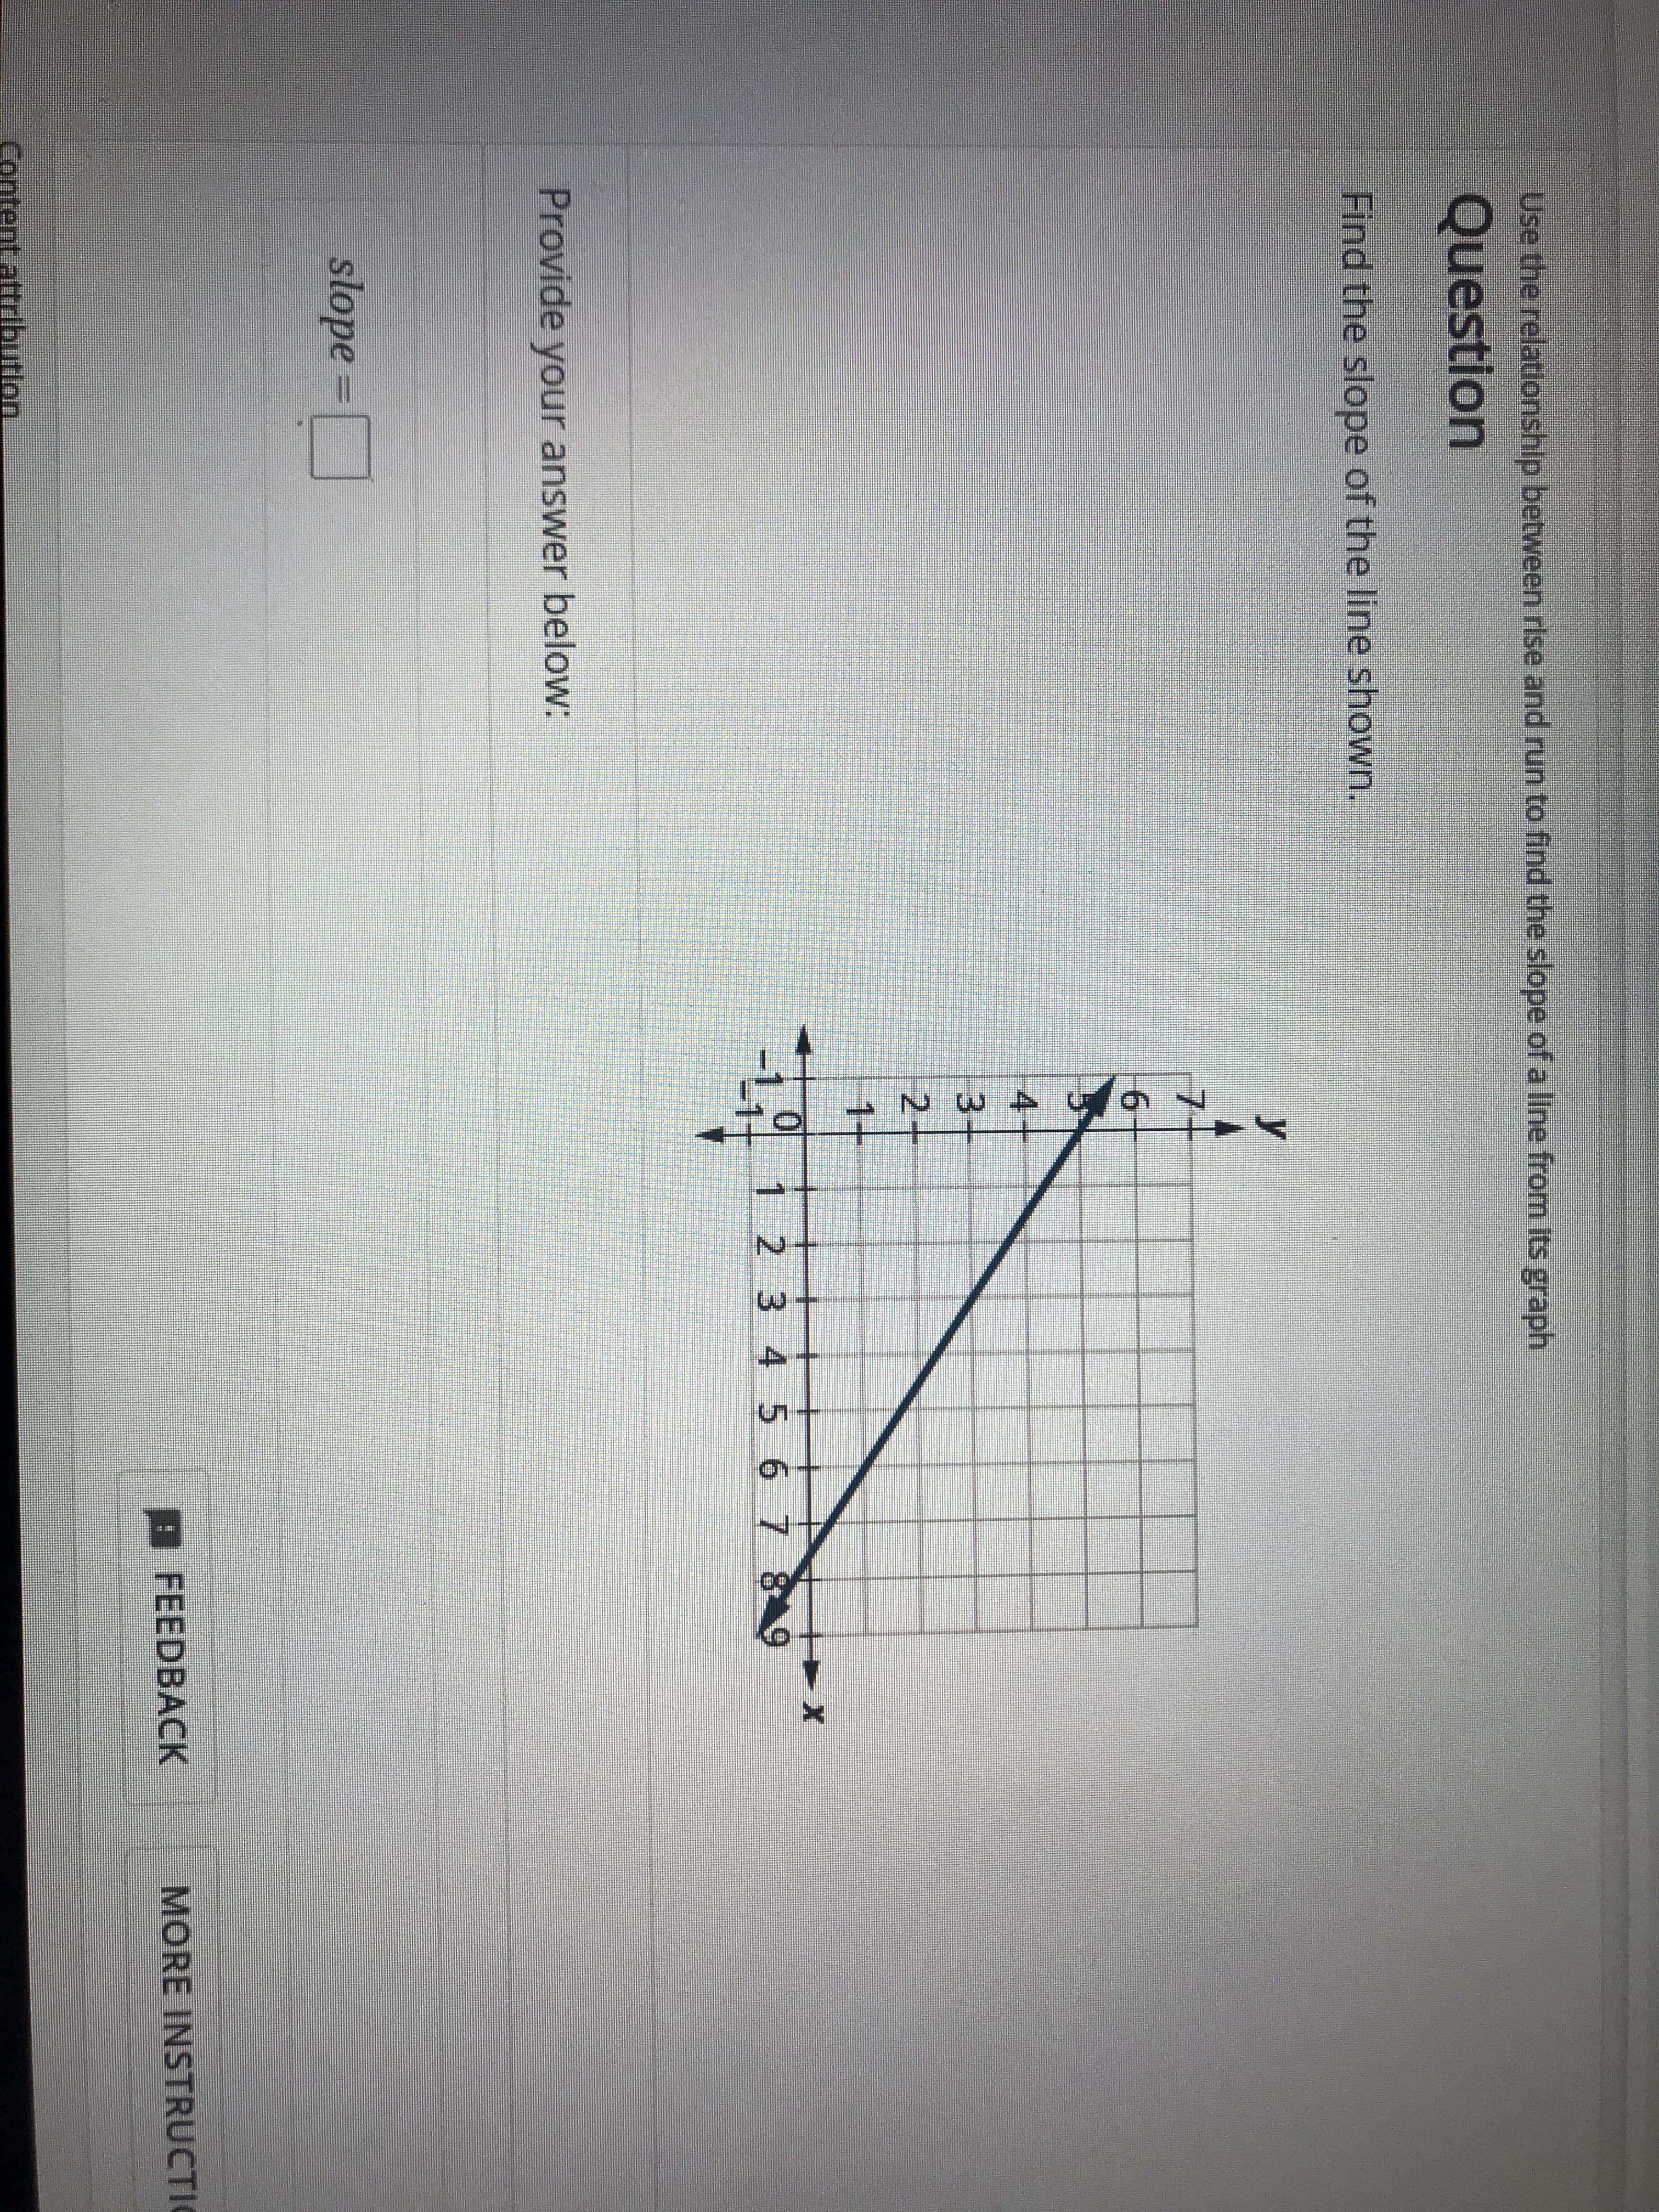 Use the relationship between rlse and run to find the slope of a line from its graph
Question
Find the slope of the line shown.
y
7-
6
4-
3
2+
1+
23 4 56 7
Provide your answer below:
slope
FEEDBACK
MORE INSTRUCTI
Content
ttribution
